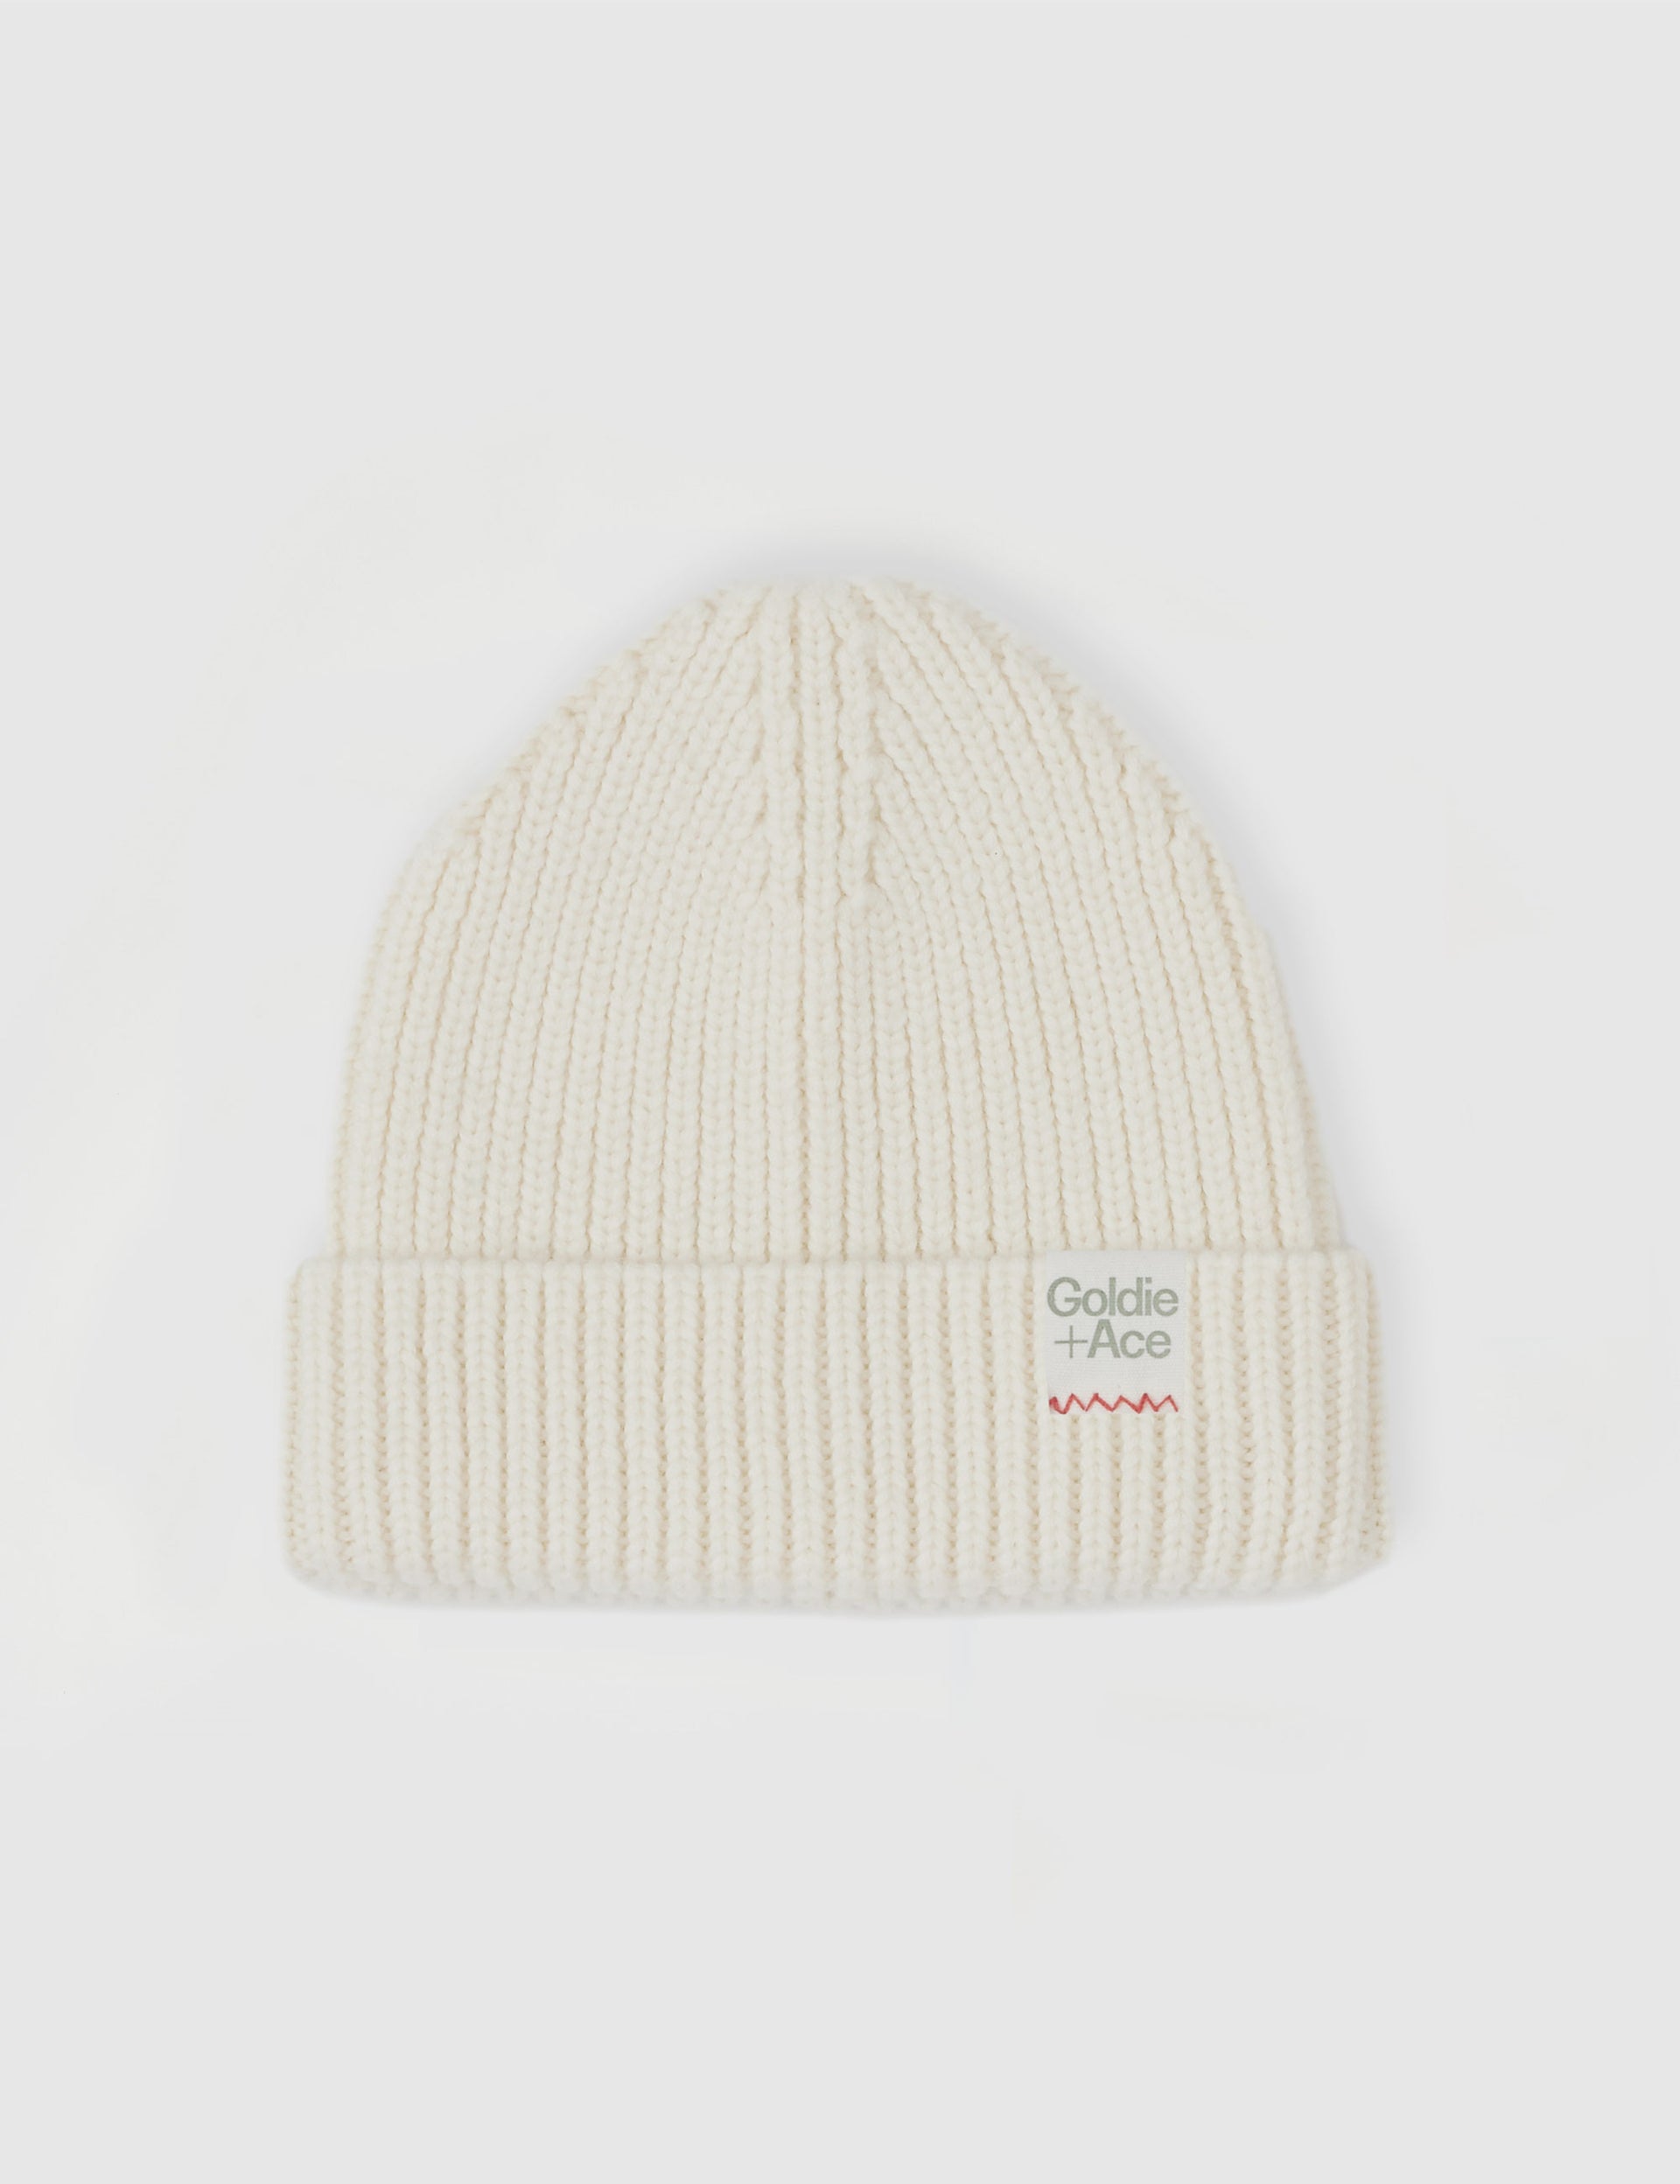 Goldie+Ace Wool Beanie Marshmallow